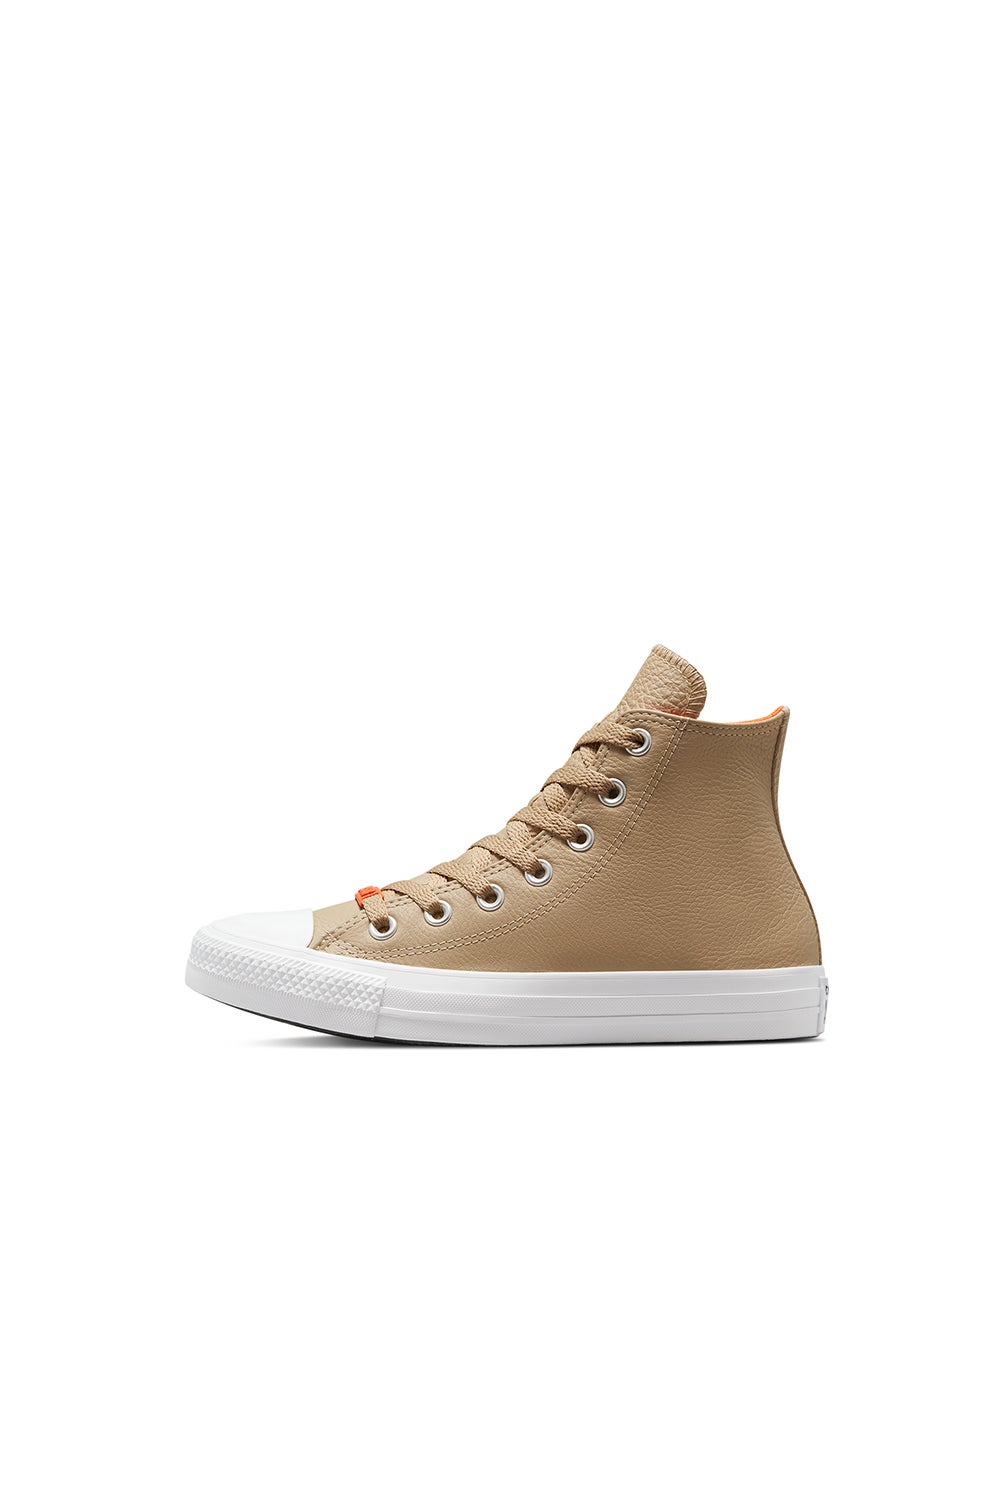 Converse Chuck Taylor All Star Leather HD Fusion High Top Nomad Khaki